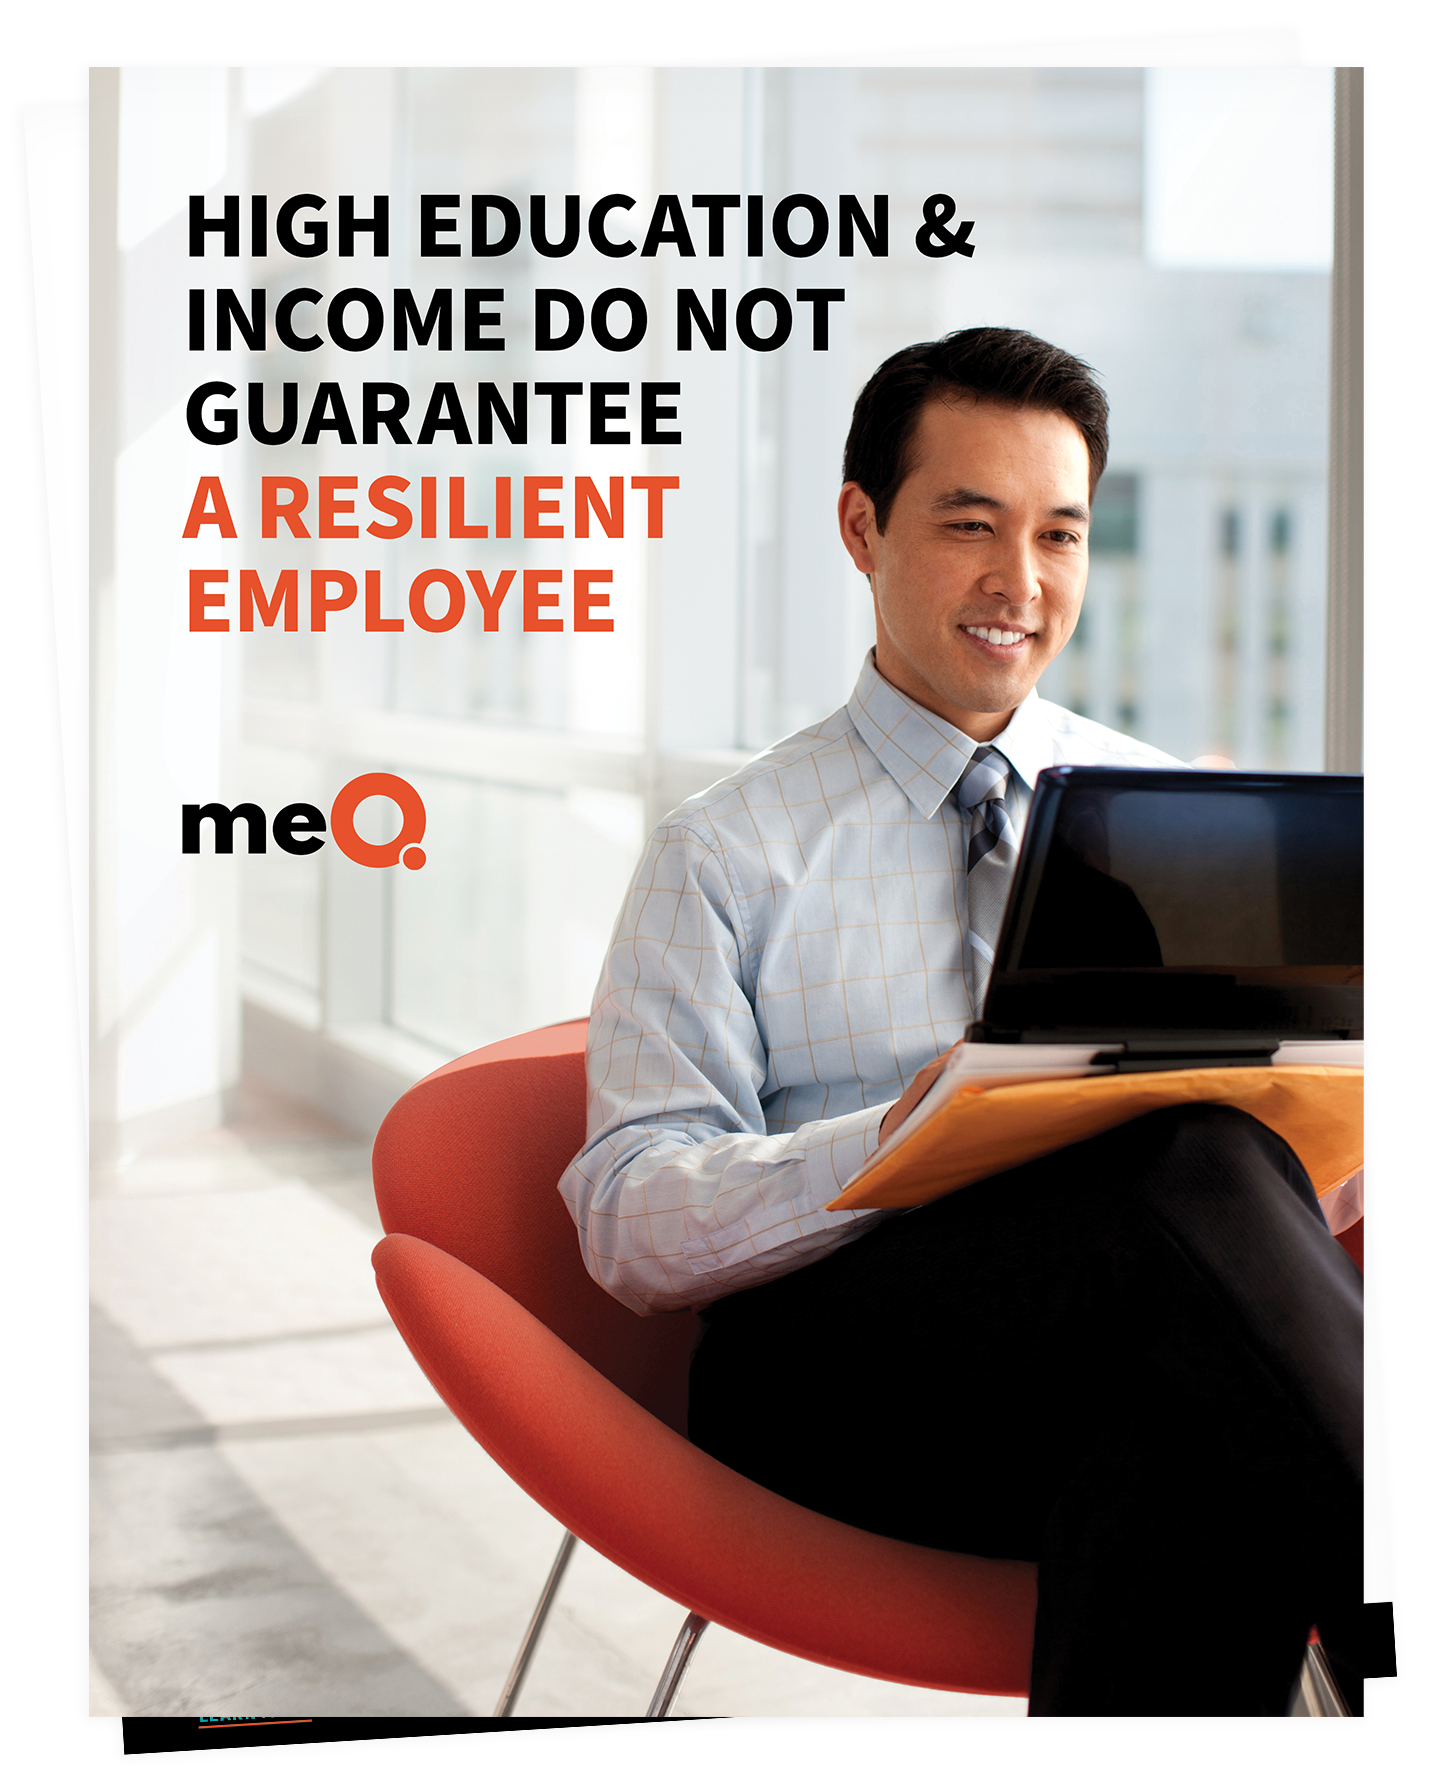 High Education and Income Do Not Guarantee a Resilient Employee